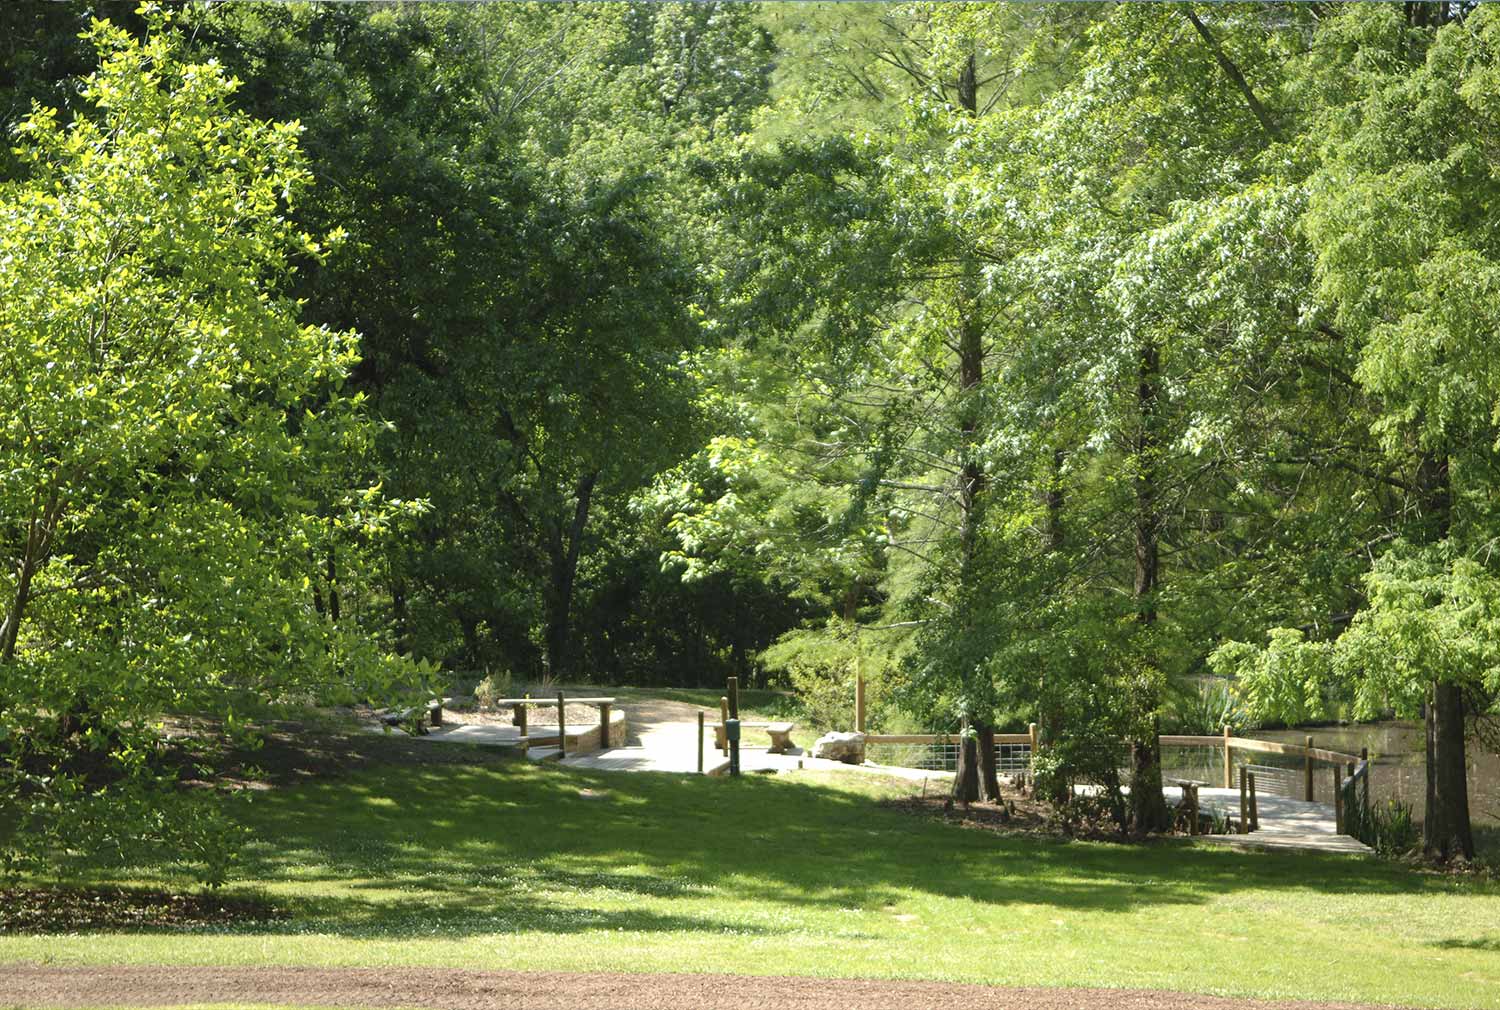 An open view of the Arboretum.